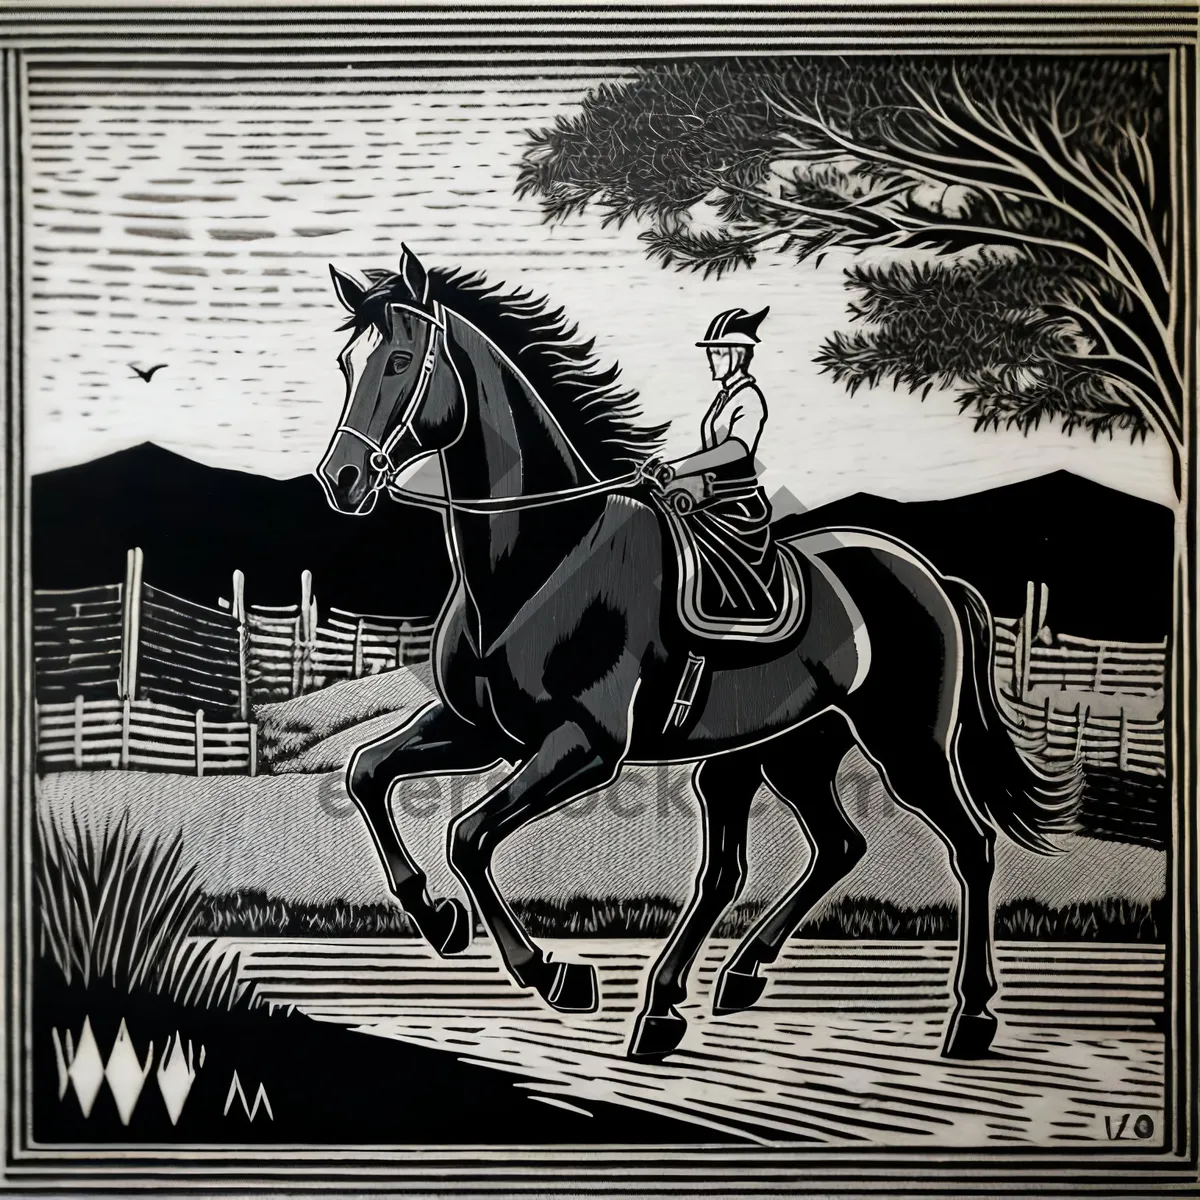 Picture of Wild Horse Silhouette on Zebra-Printed Book Jacket